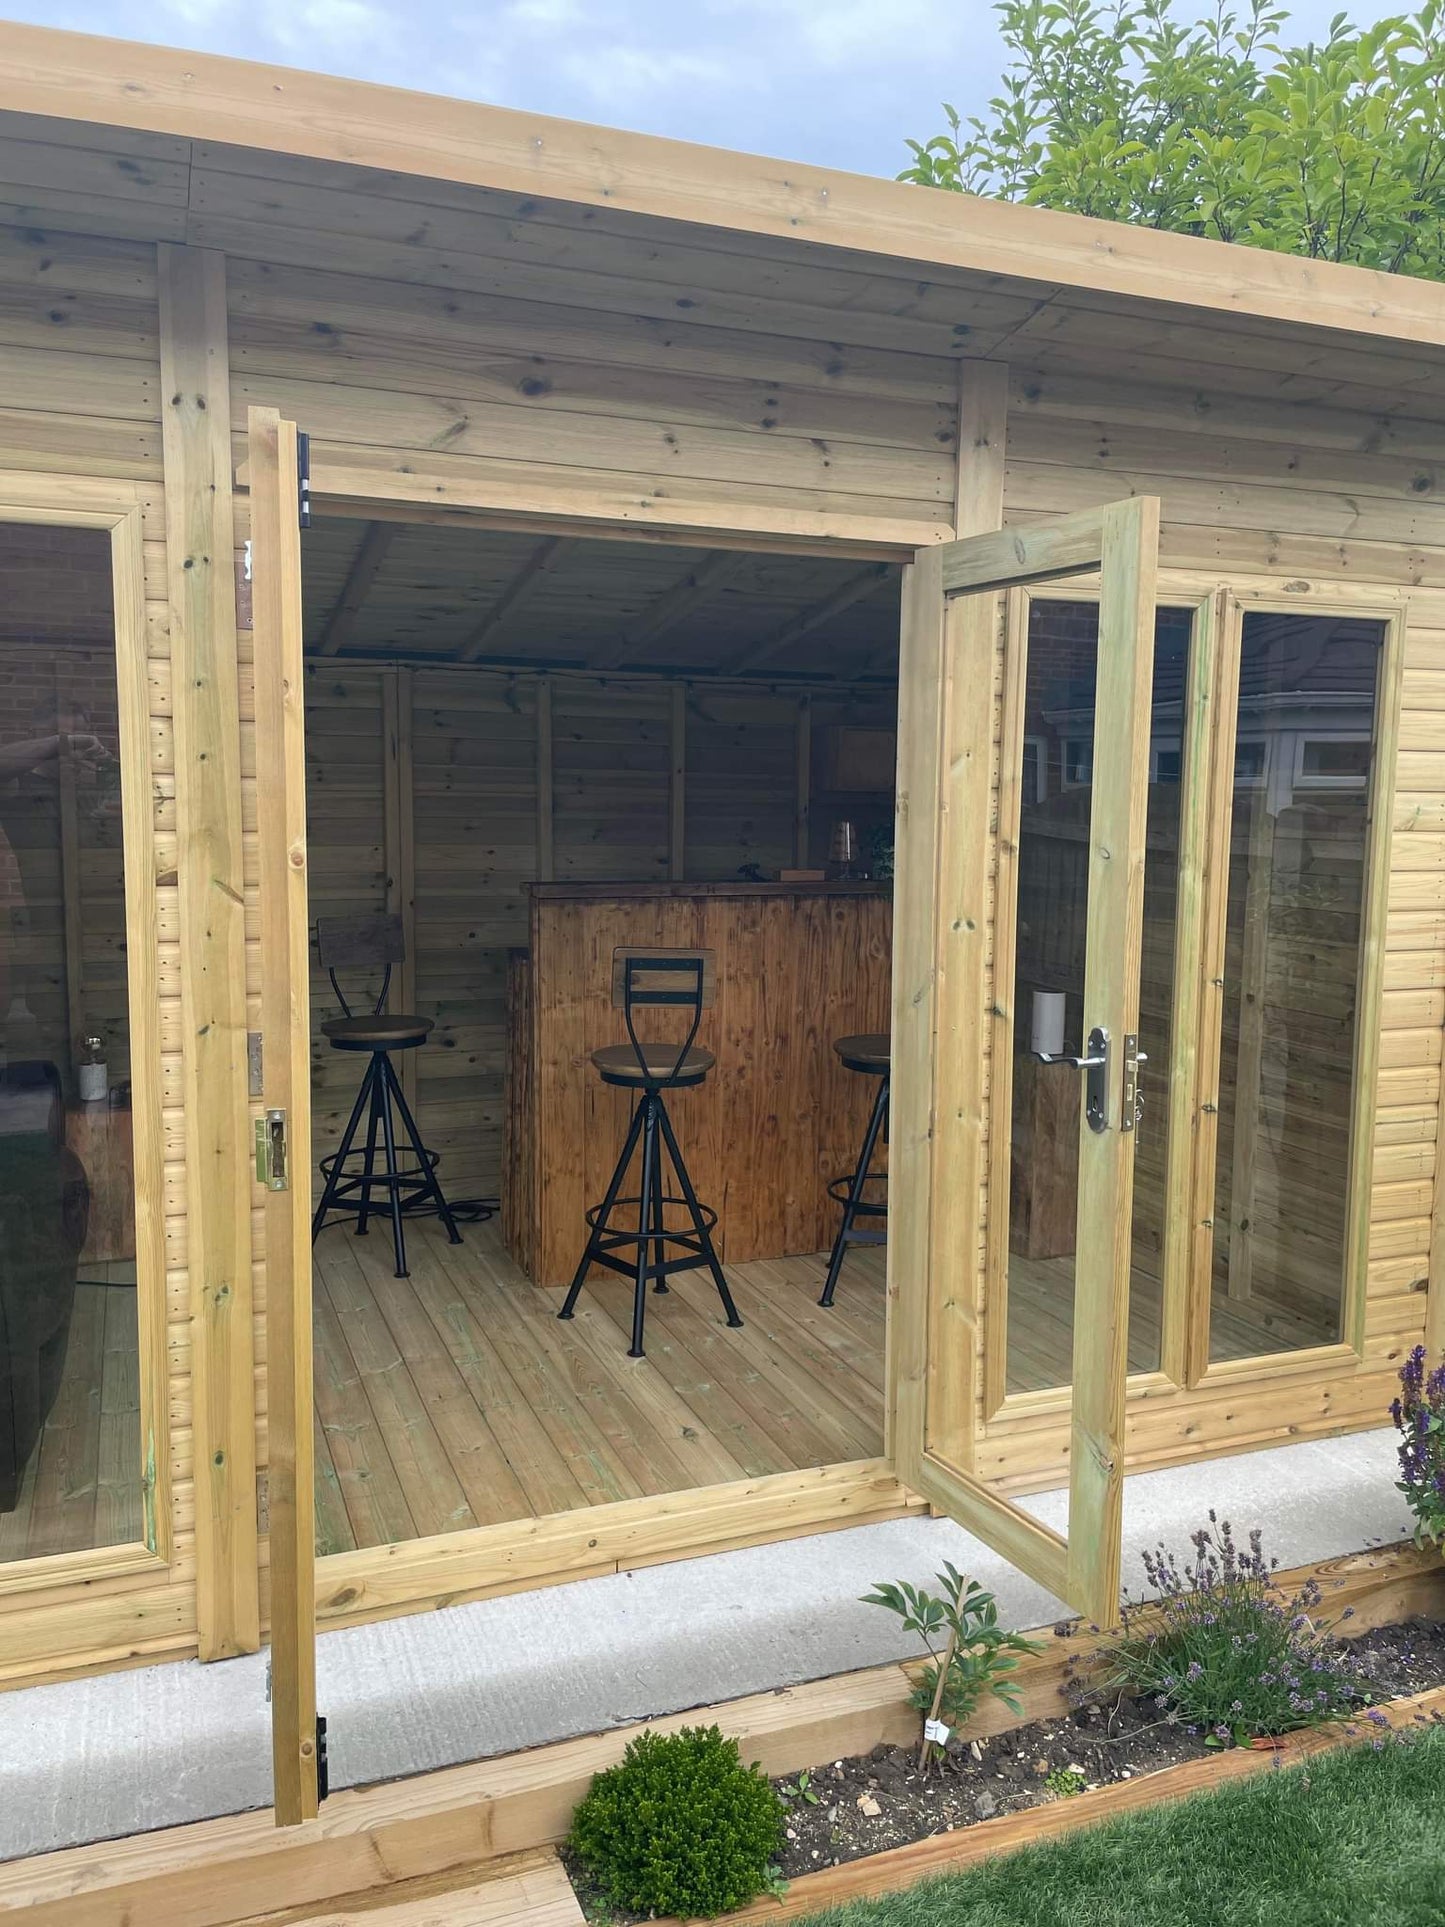 Tanalised Charlotte Pent Summerhouse Keighley Timber & Fencing sheds www.keighleytimbersheds.co.uk